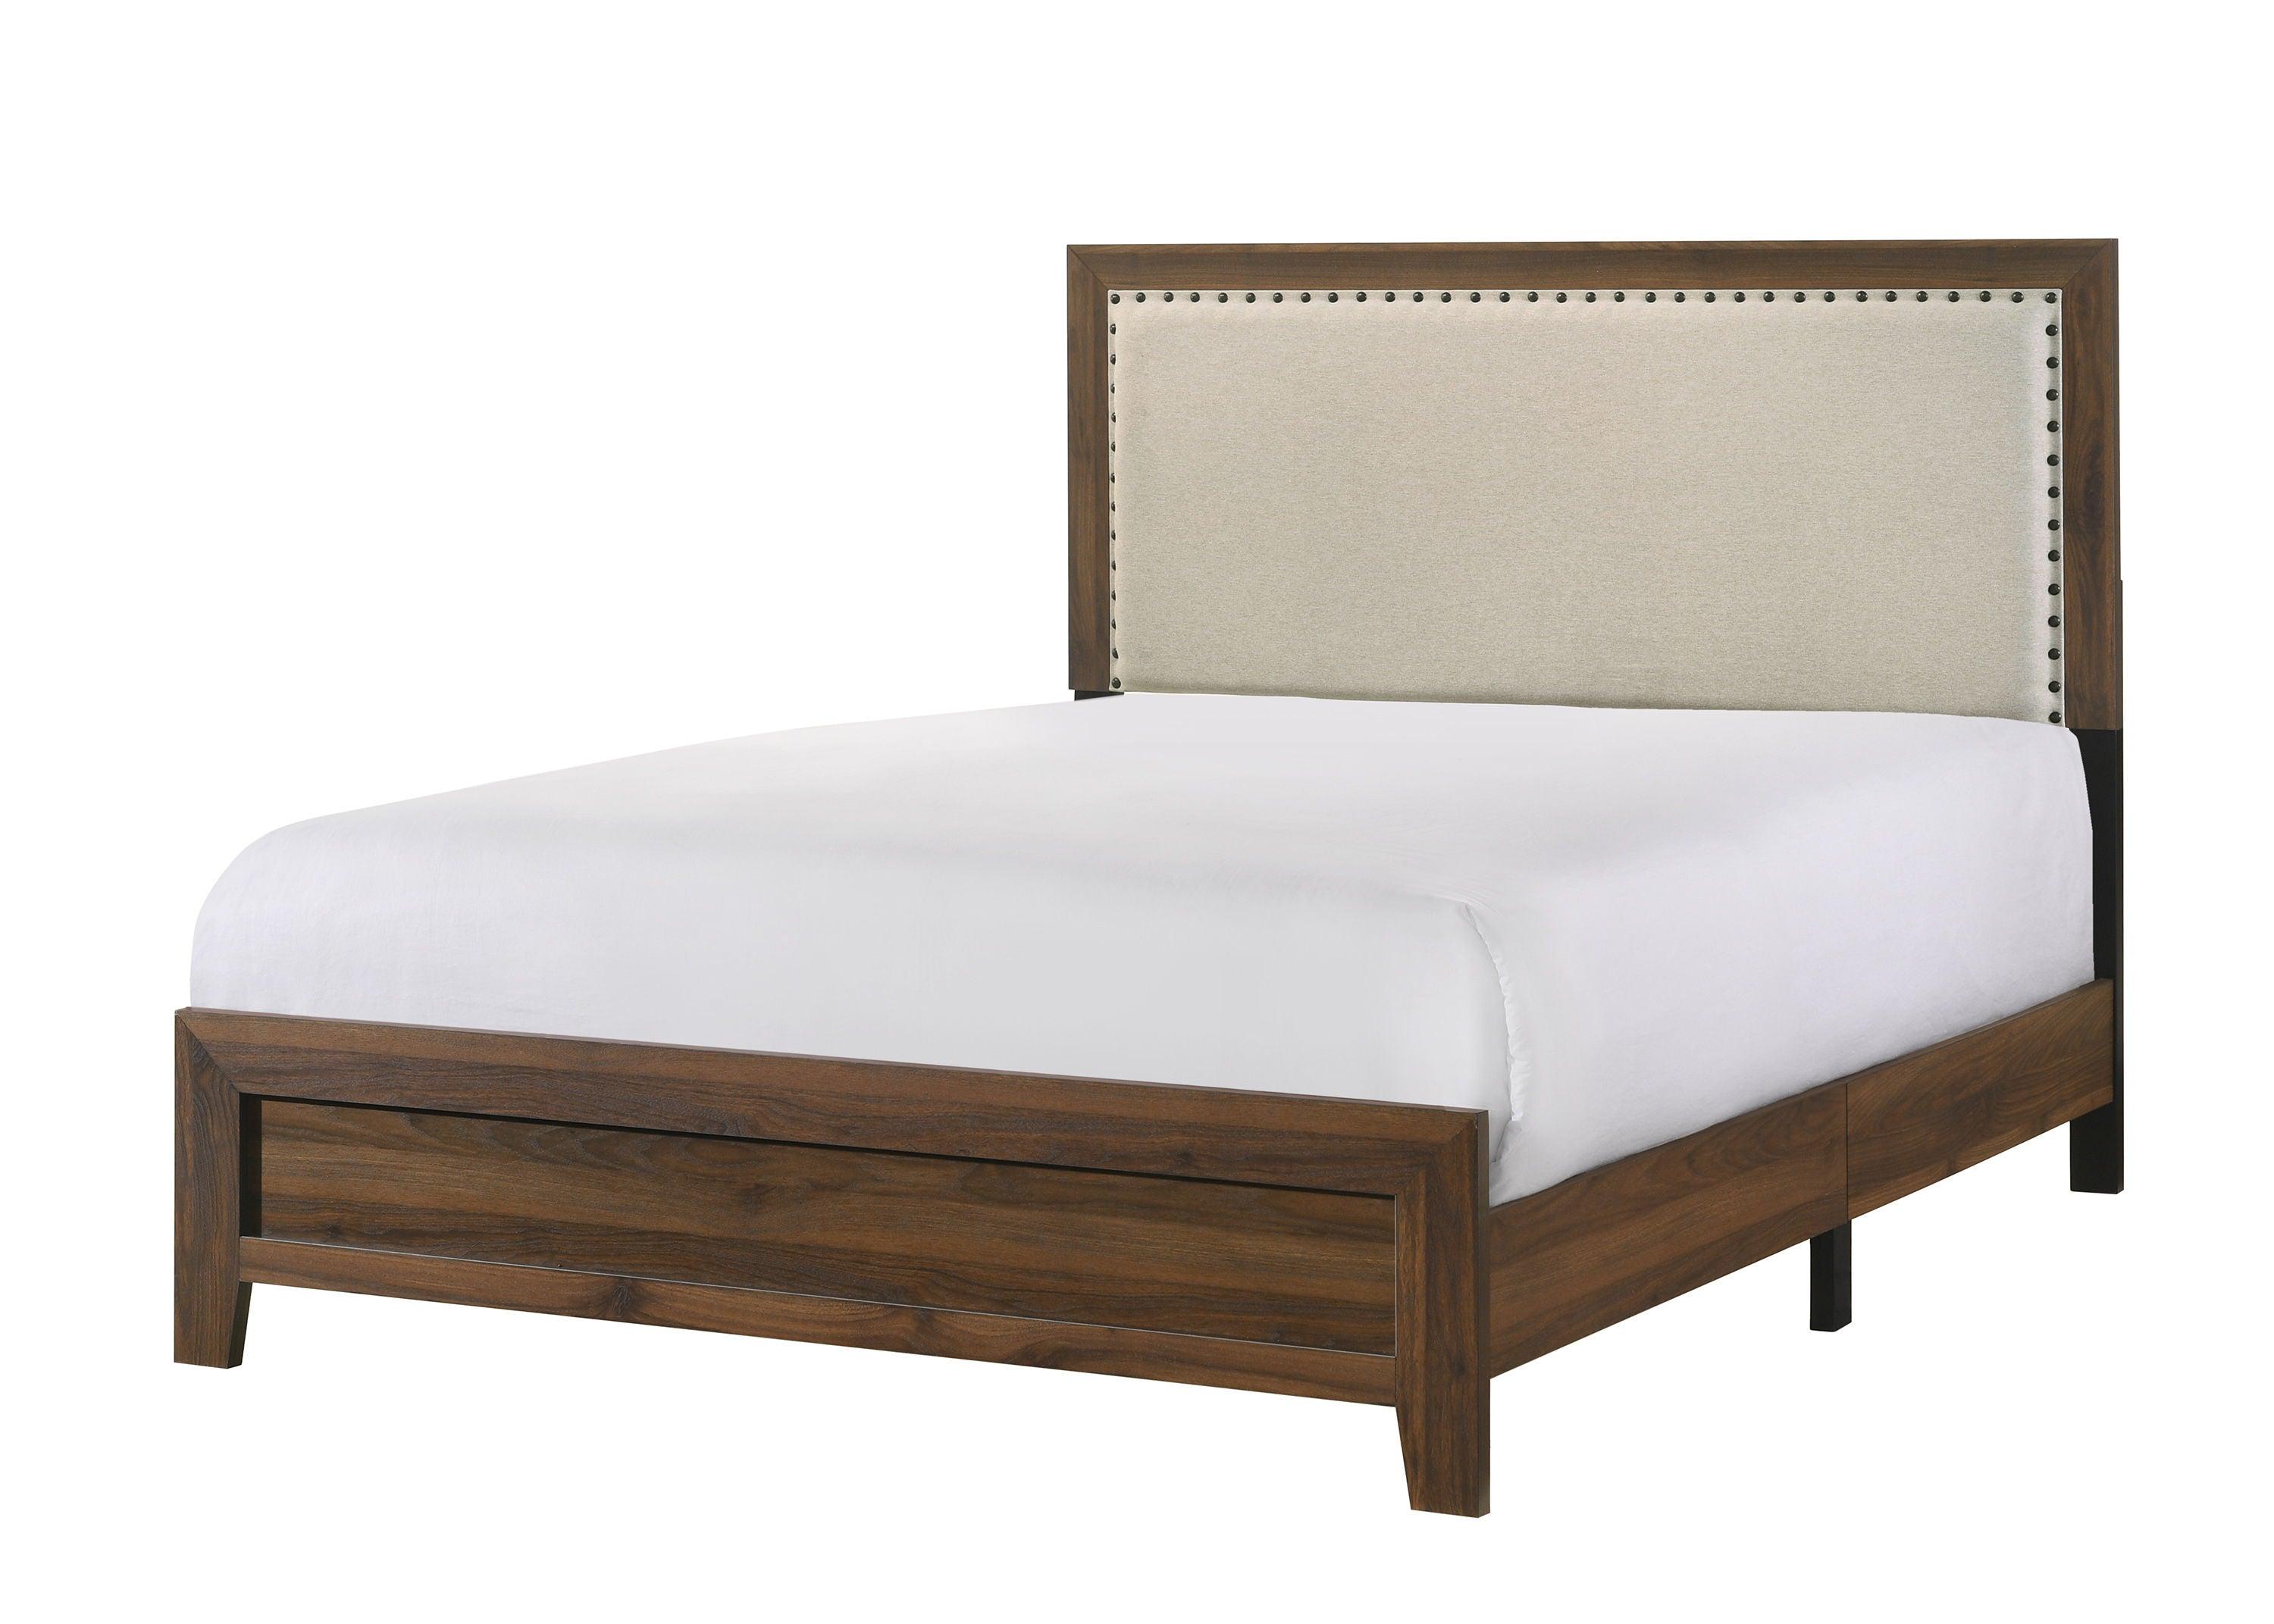 Crown Mark - Millie - Upholstery Bed One Box - 5th Avenue Furniture